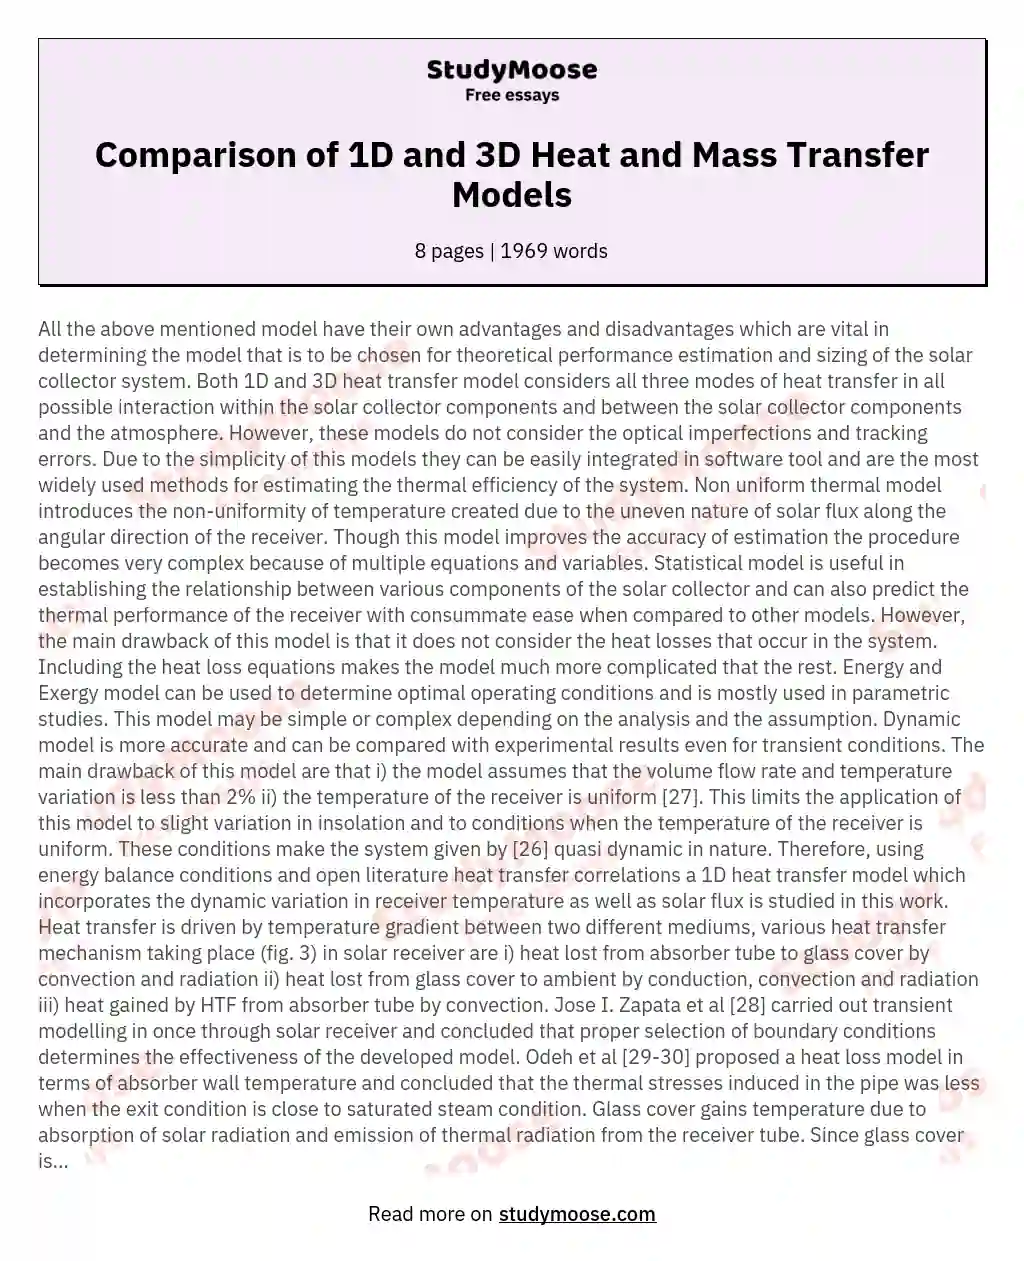 Comparison of 1D and 3D Heat and Mass Transfer Models essay